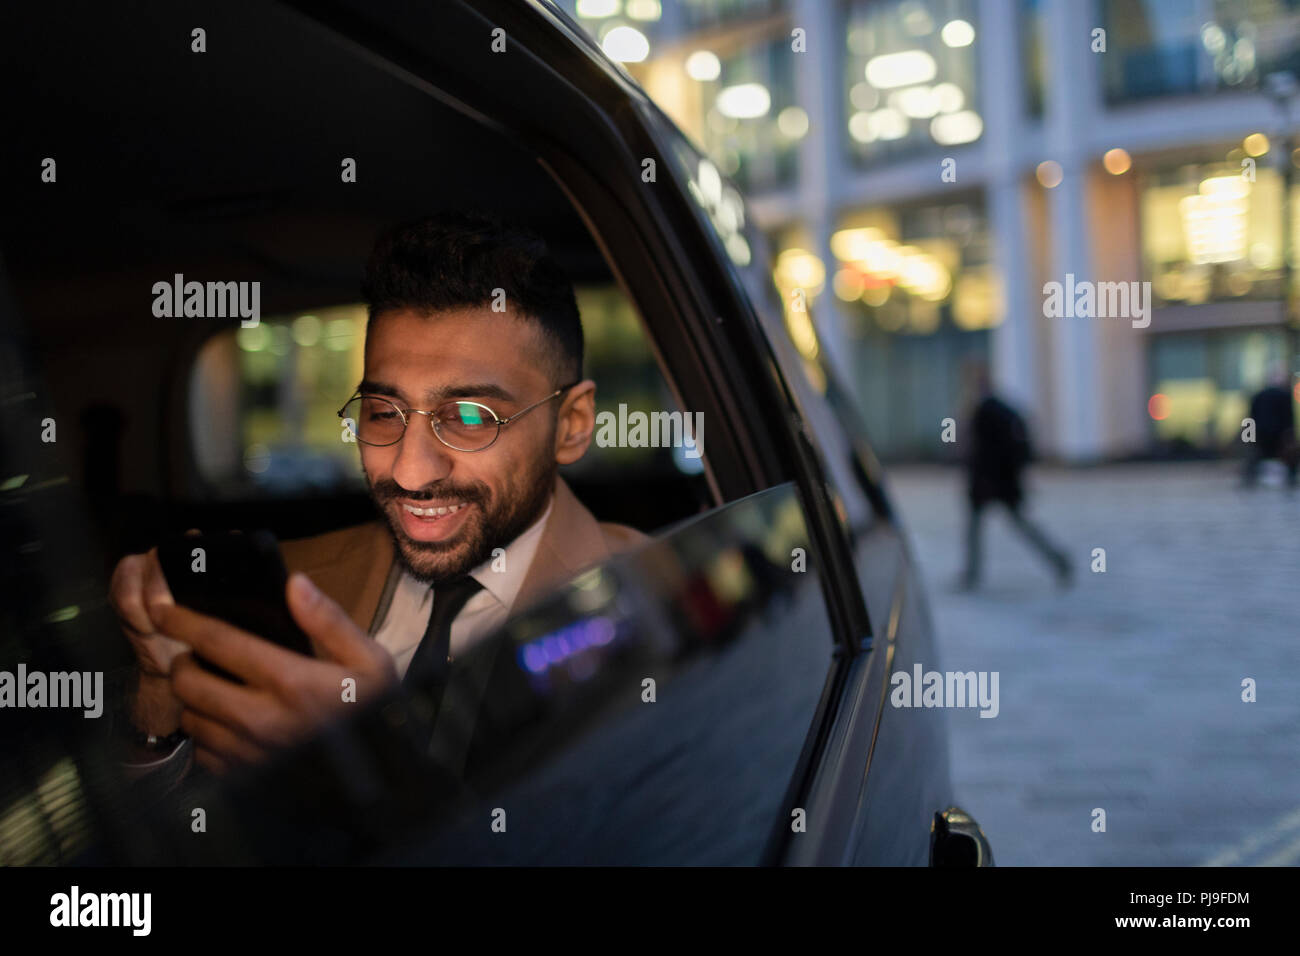 Businessman using smart phone in crowdsourced taxi at night Stock Photo